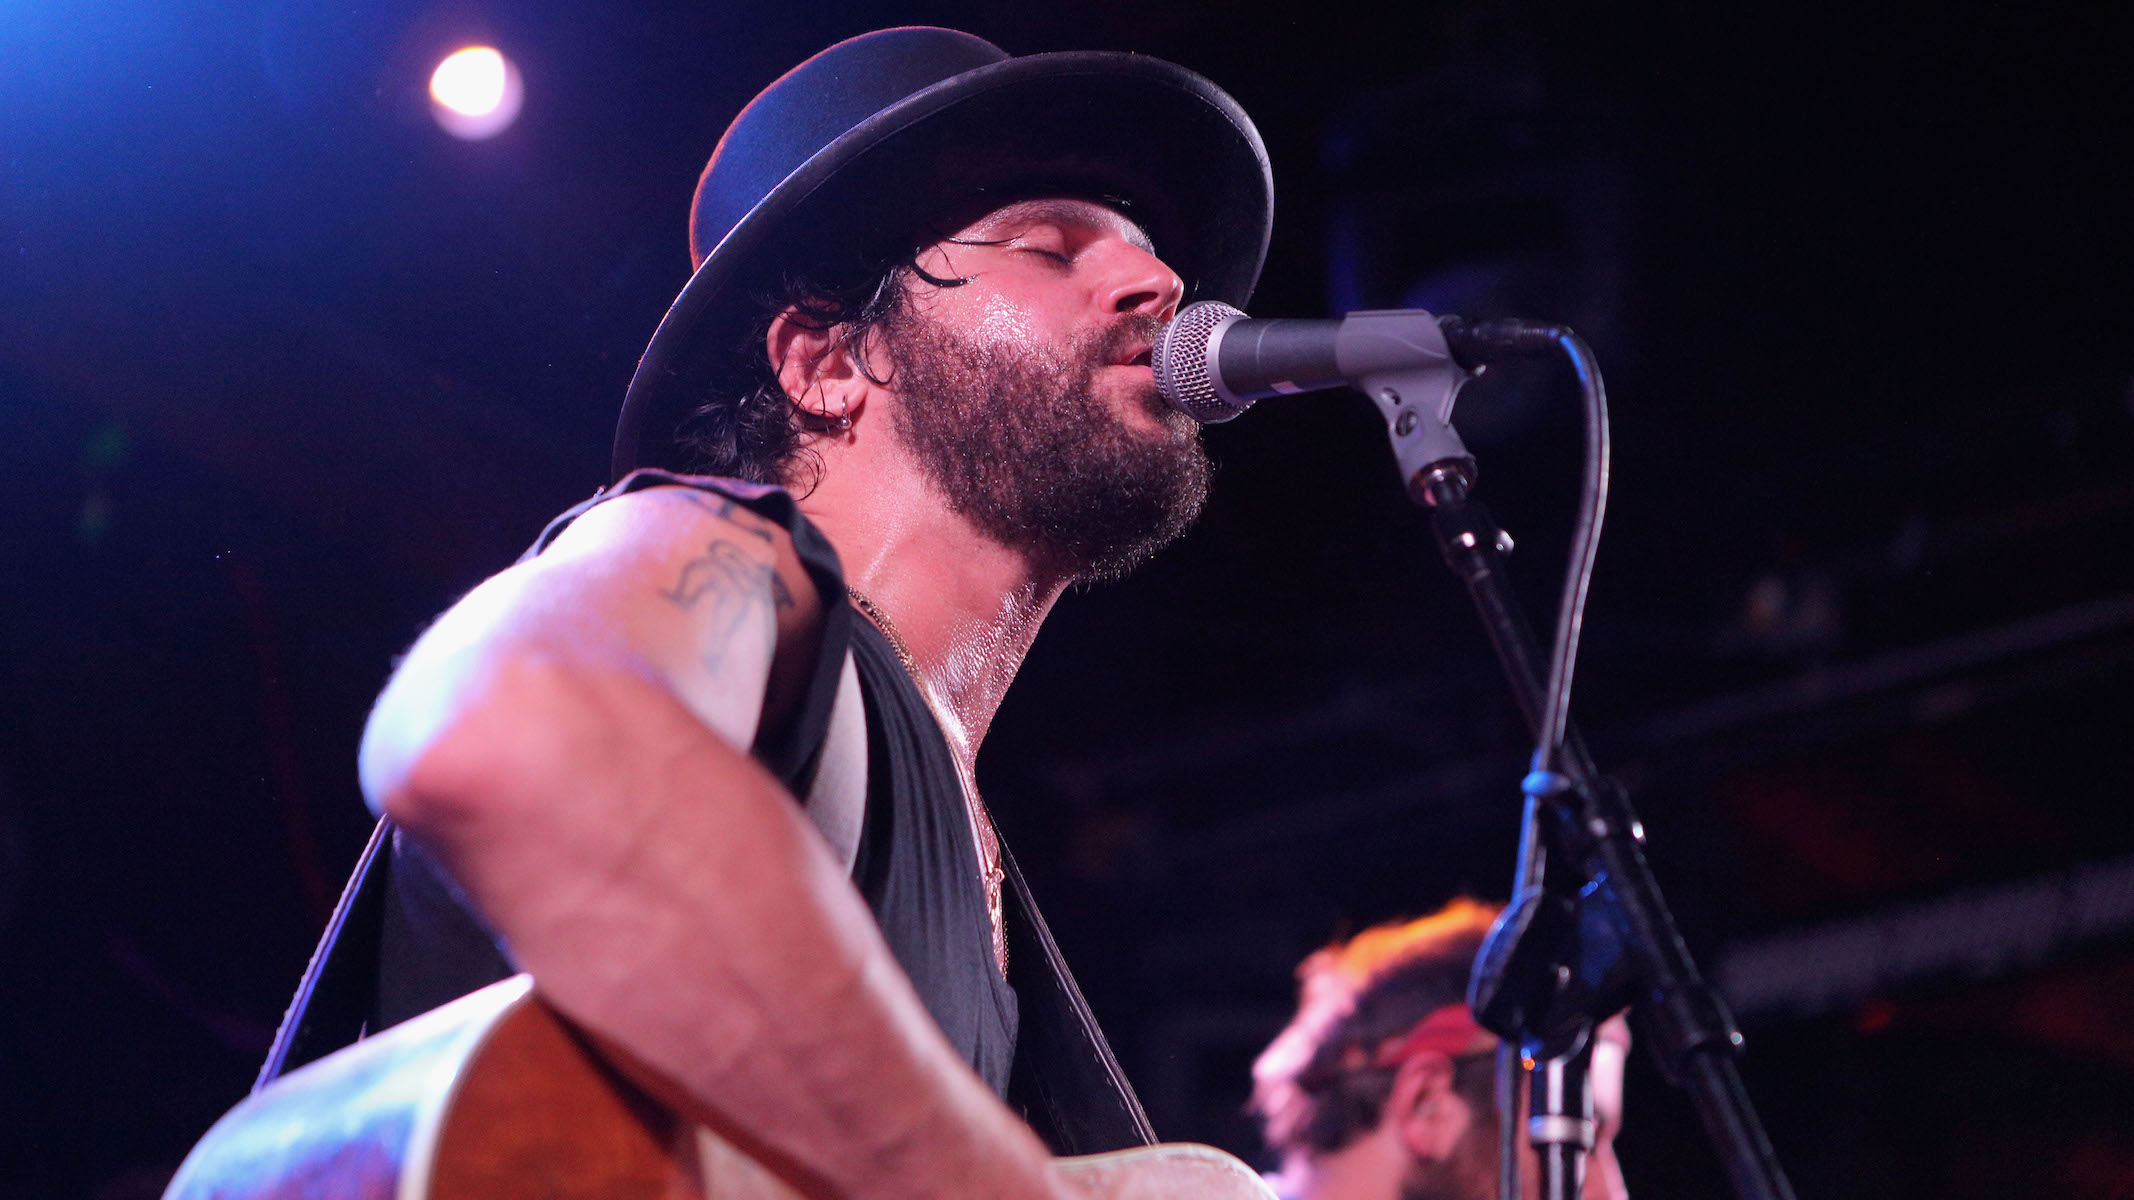 Inaugural Sound Mind Event to Feature Torres, Langhorne Slim and More, Raising Awareness for Mental Health in Music